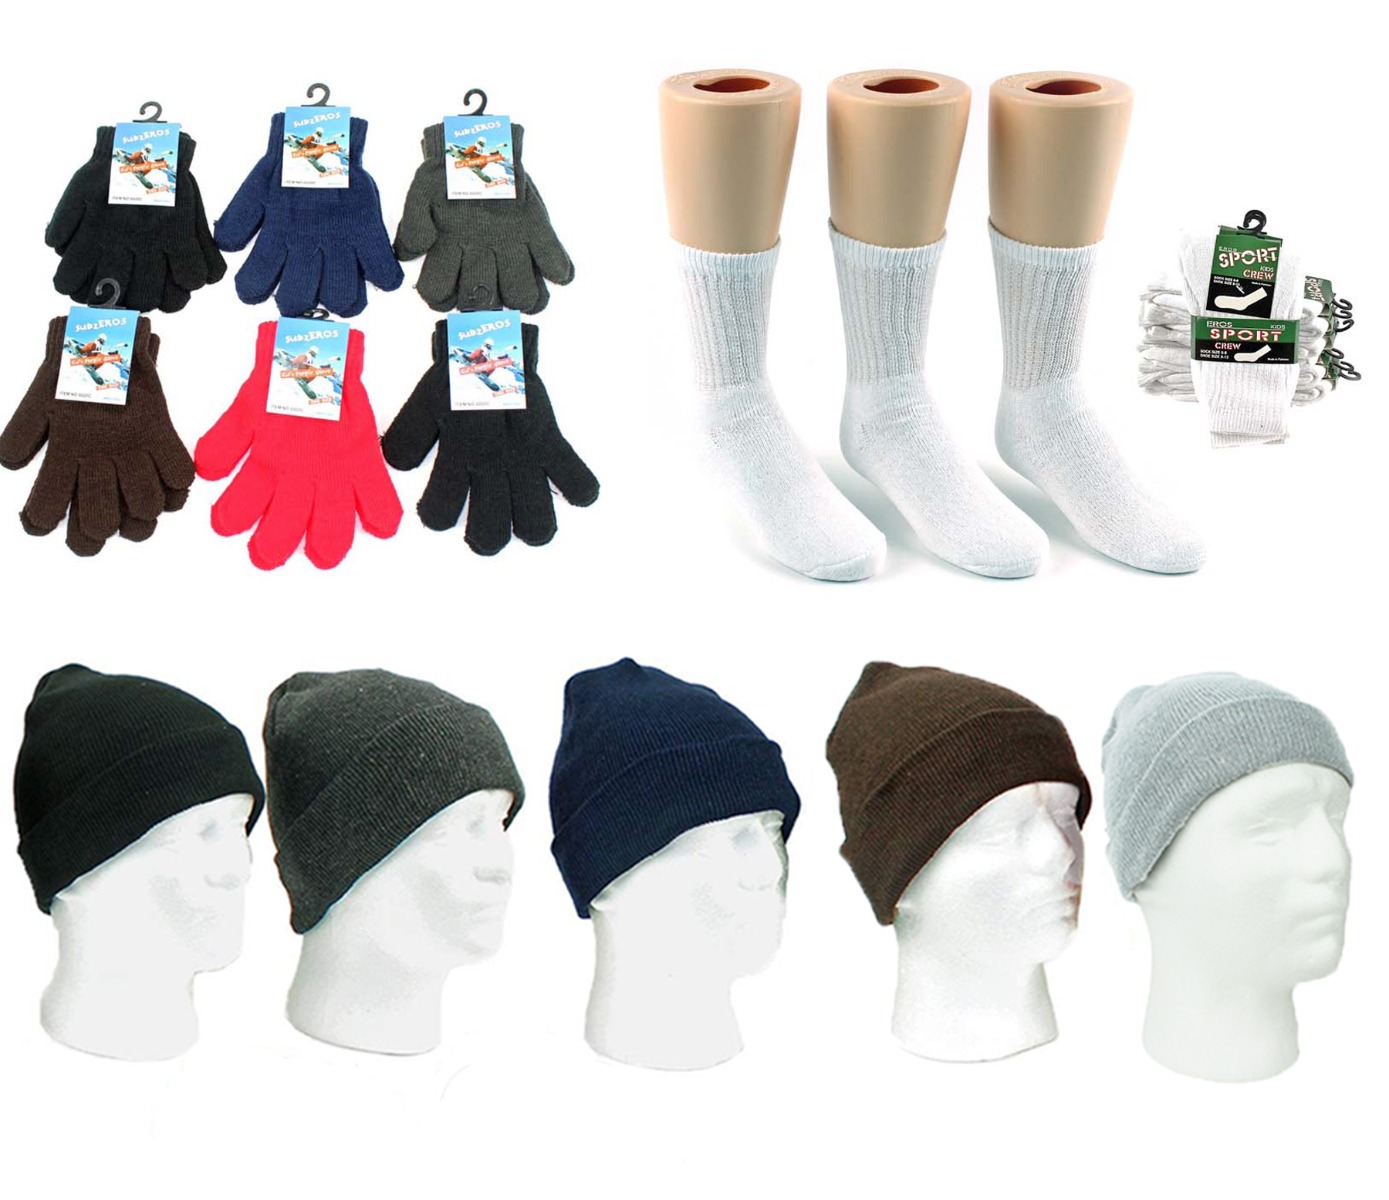 ''Children's Cuffed Winter Knit HATs, Magic Gloves, and Athletic Crew Socks Combo Pack''